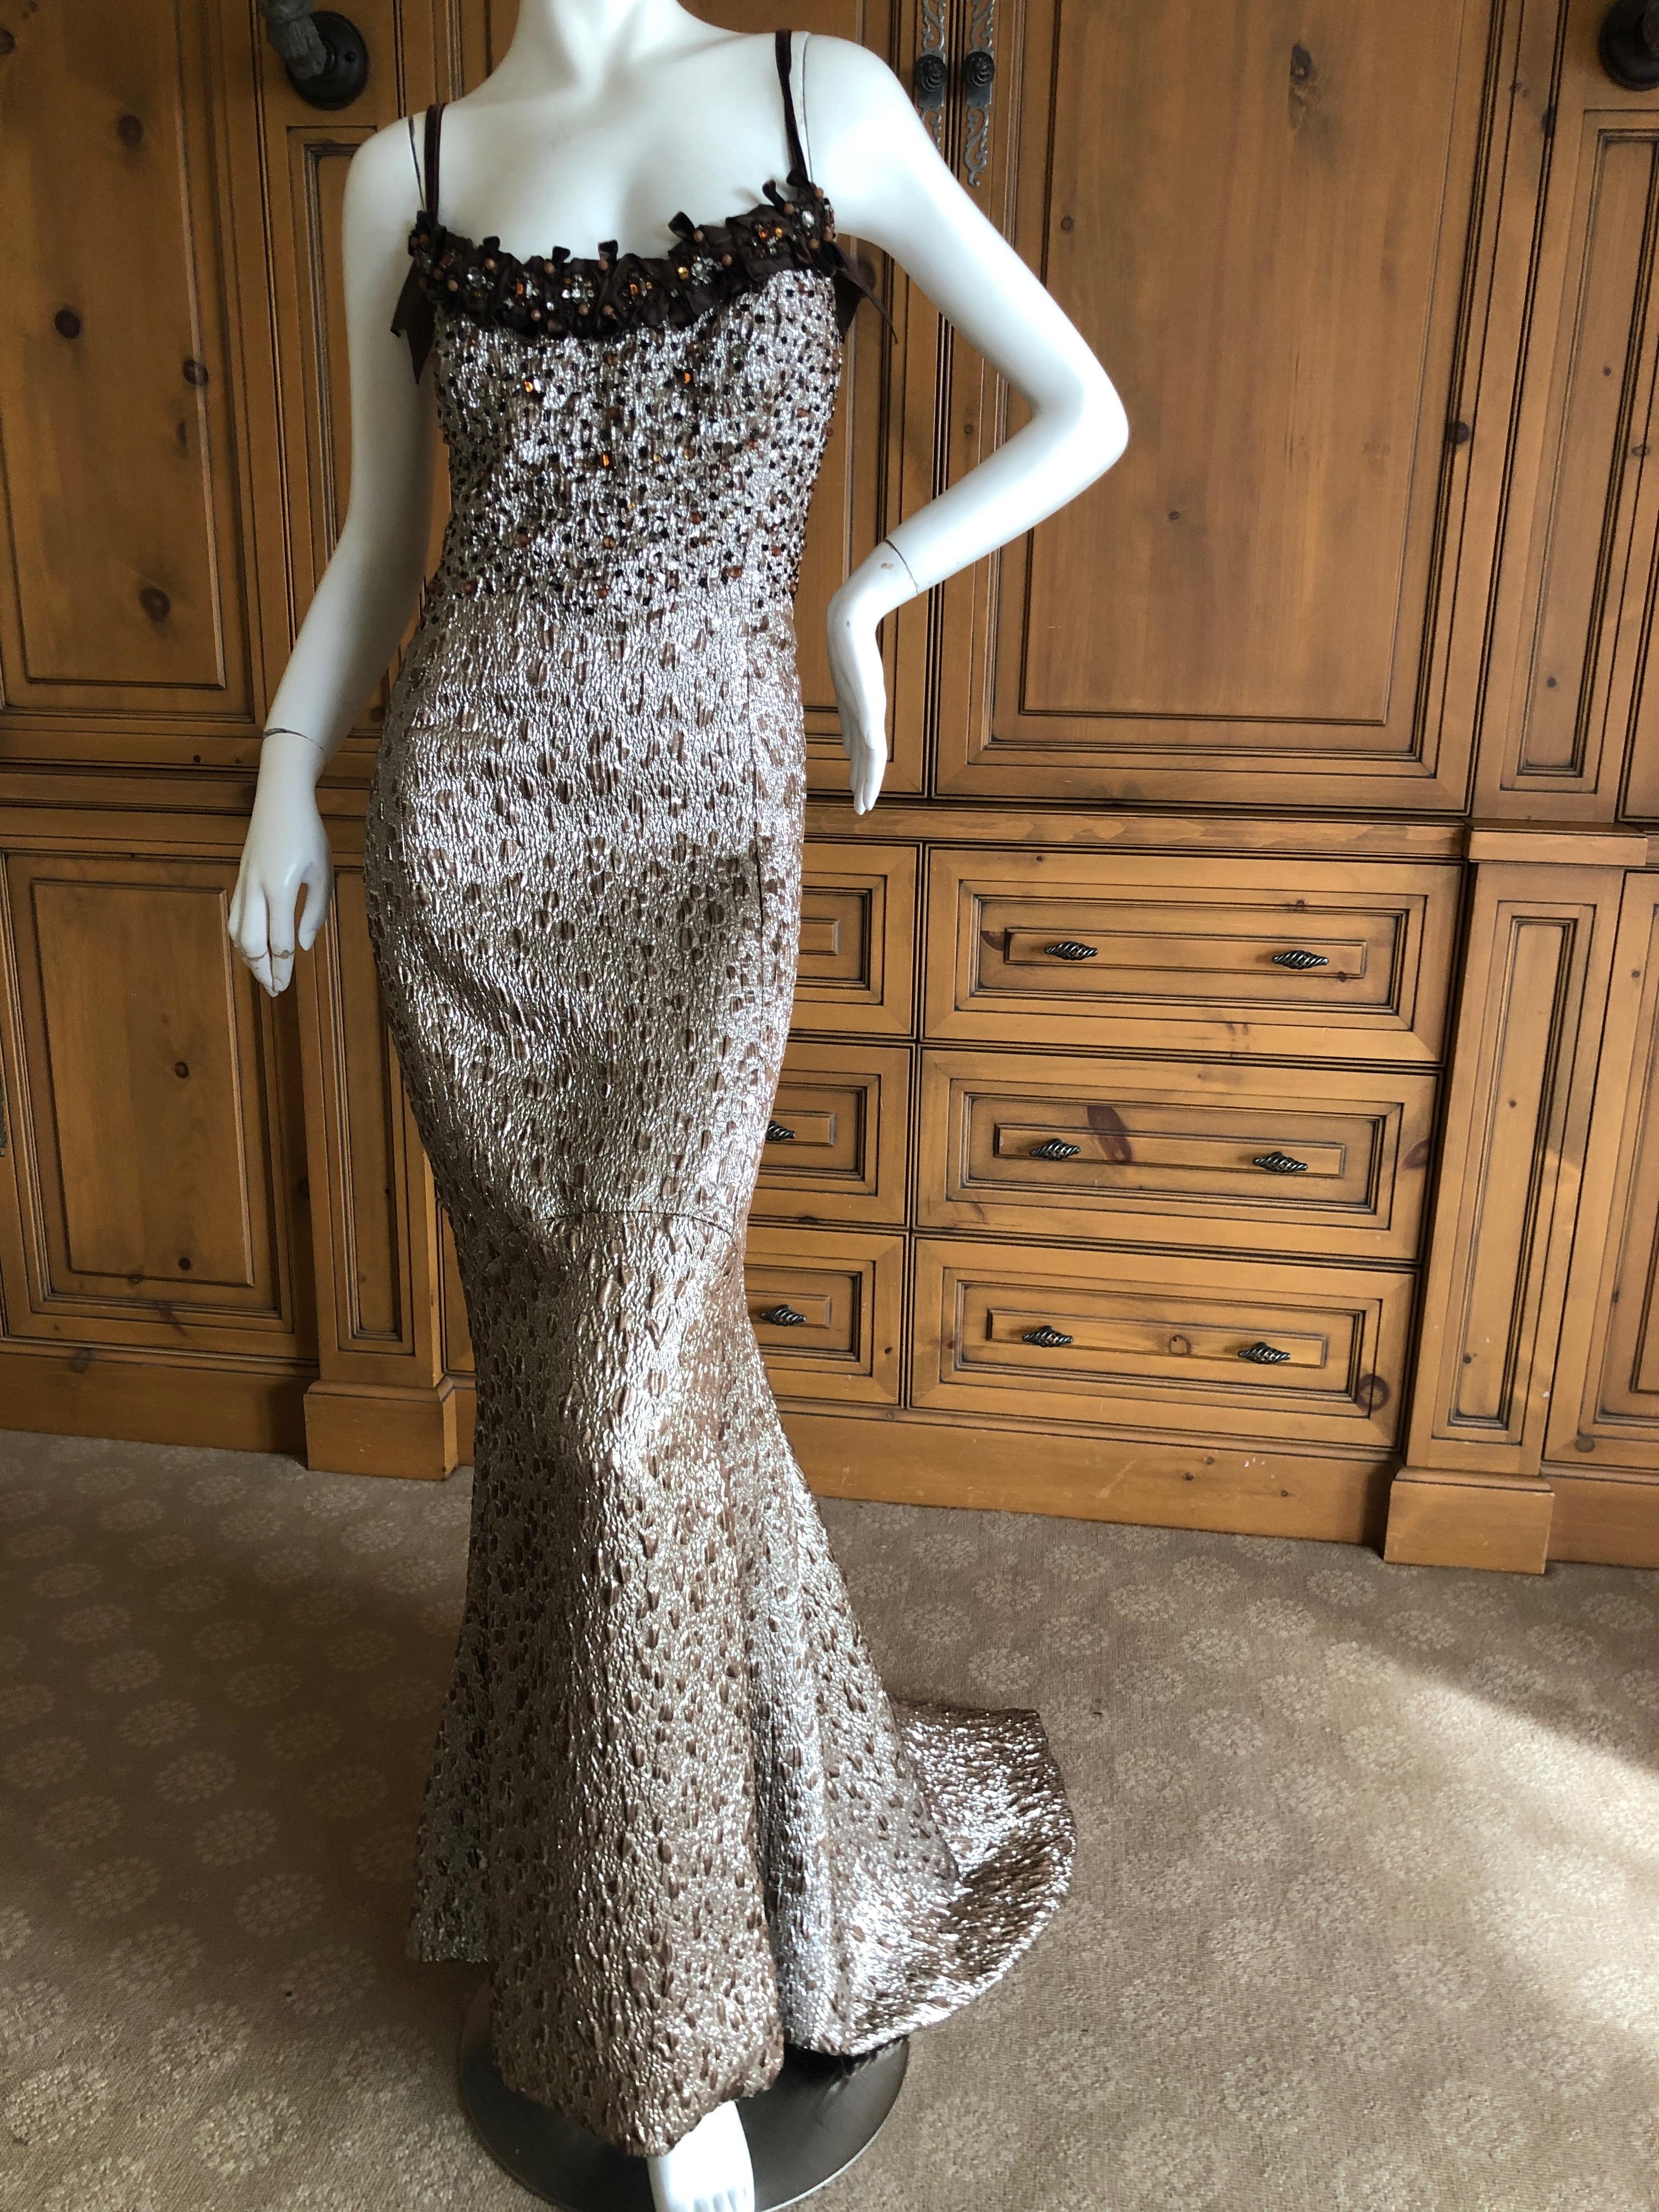 Carolina Herrera Gold Embellished Evening Gown in Hard to Find Size 14 For Sale 2